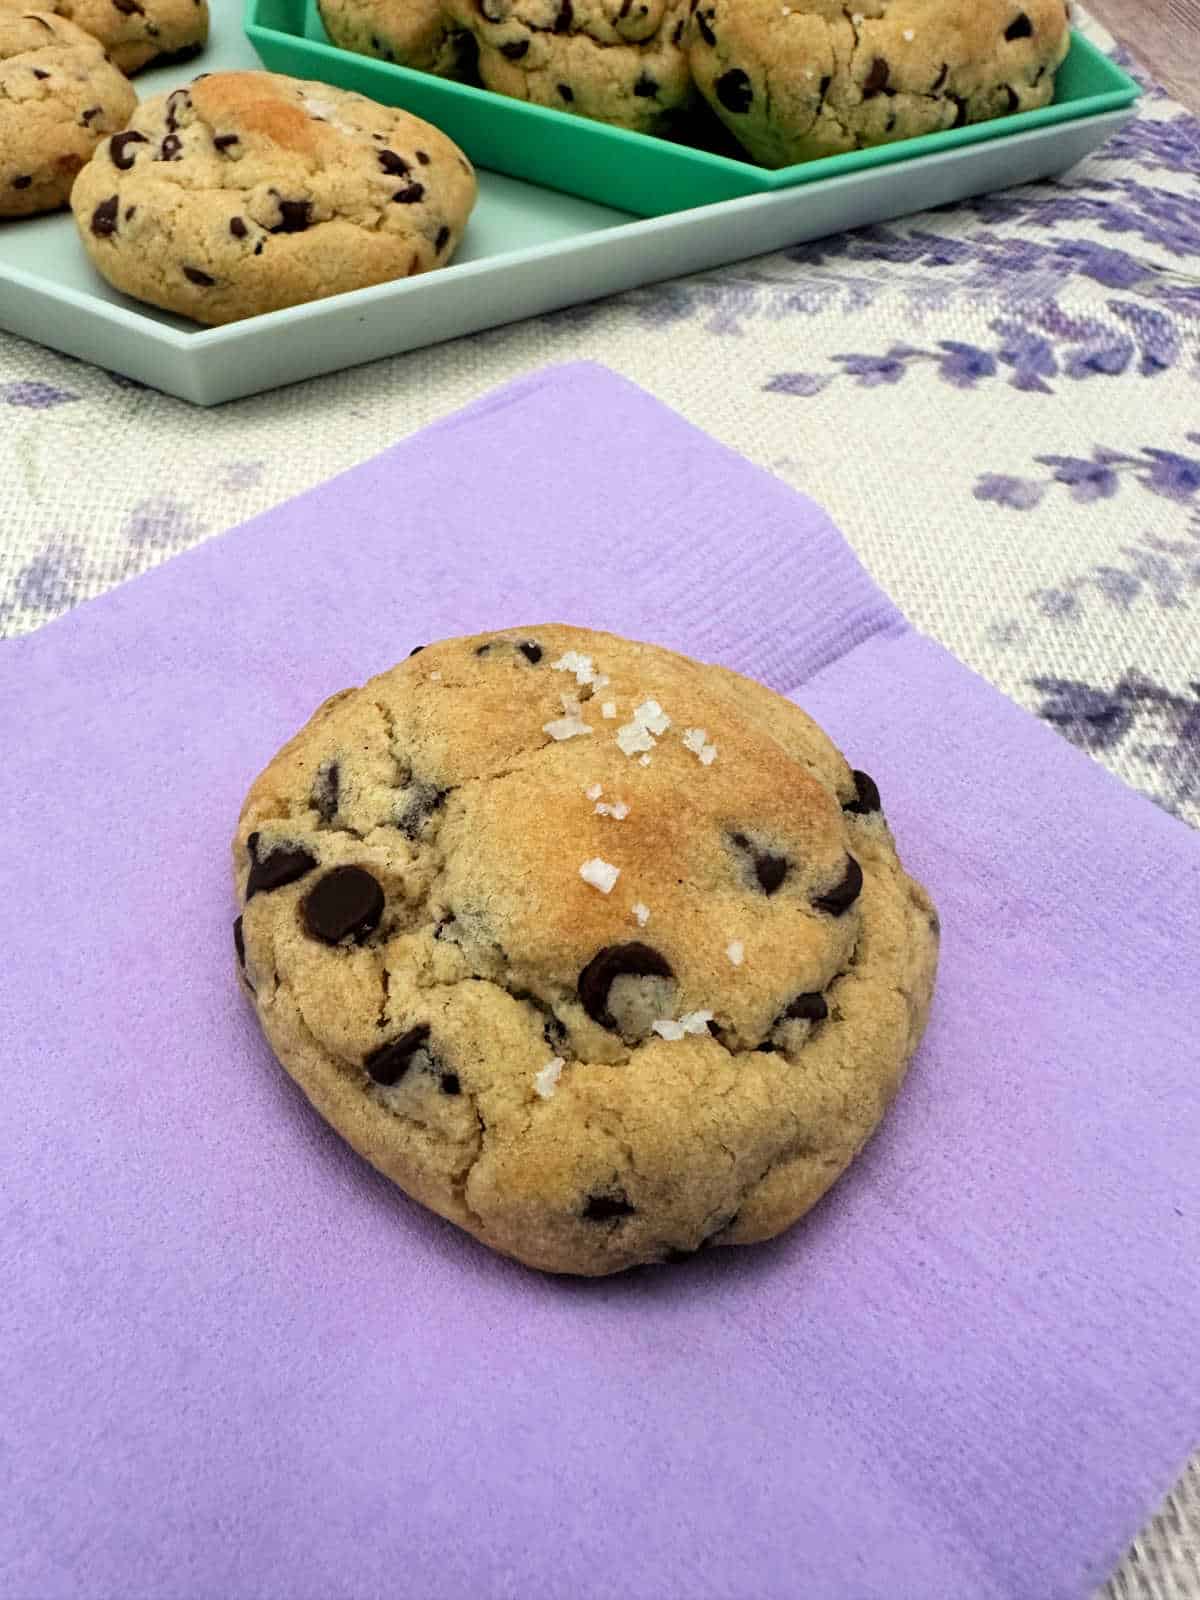 Cookie, sprinkled with salt, sits on a lavender napkin. Cookies in background are on a mint green platter resting on a lavender printed cloth.